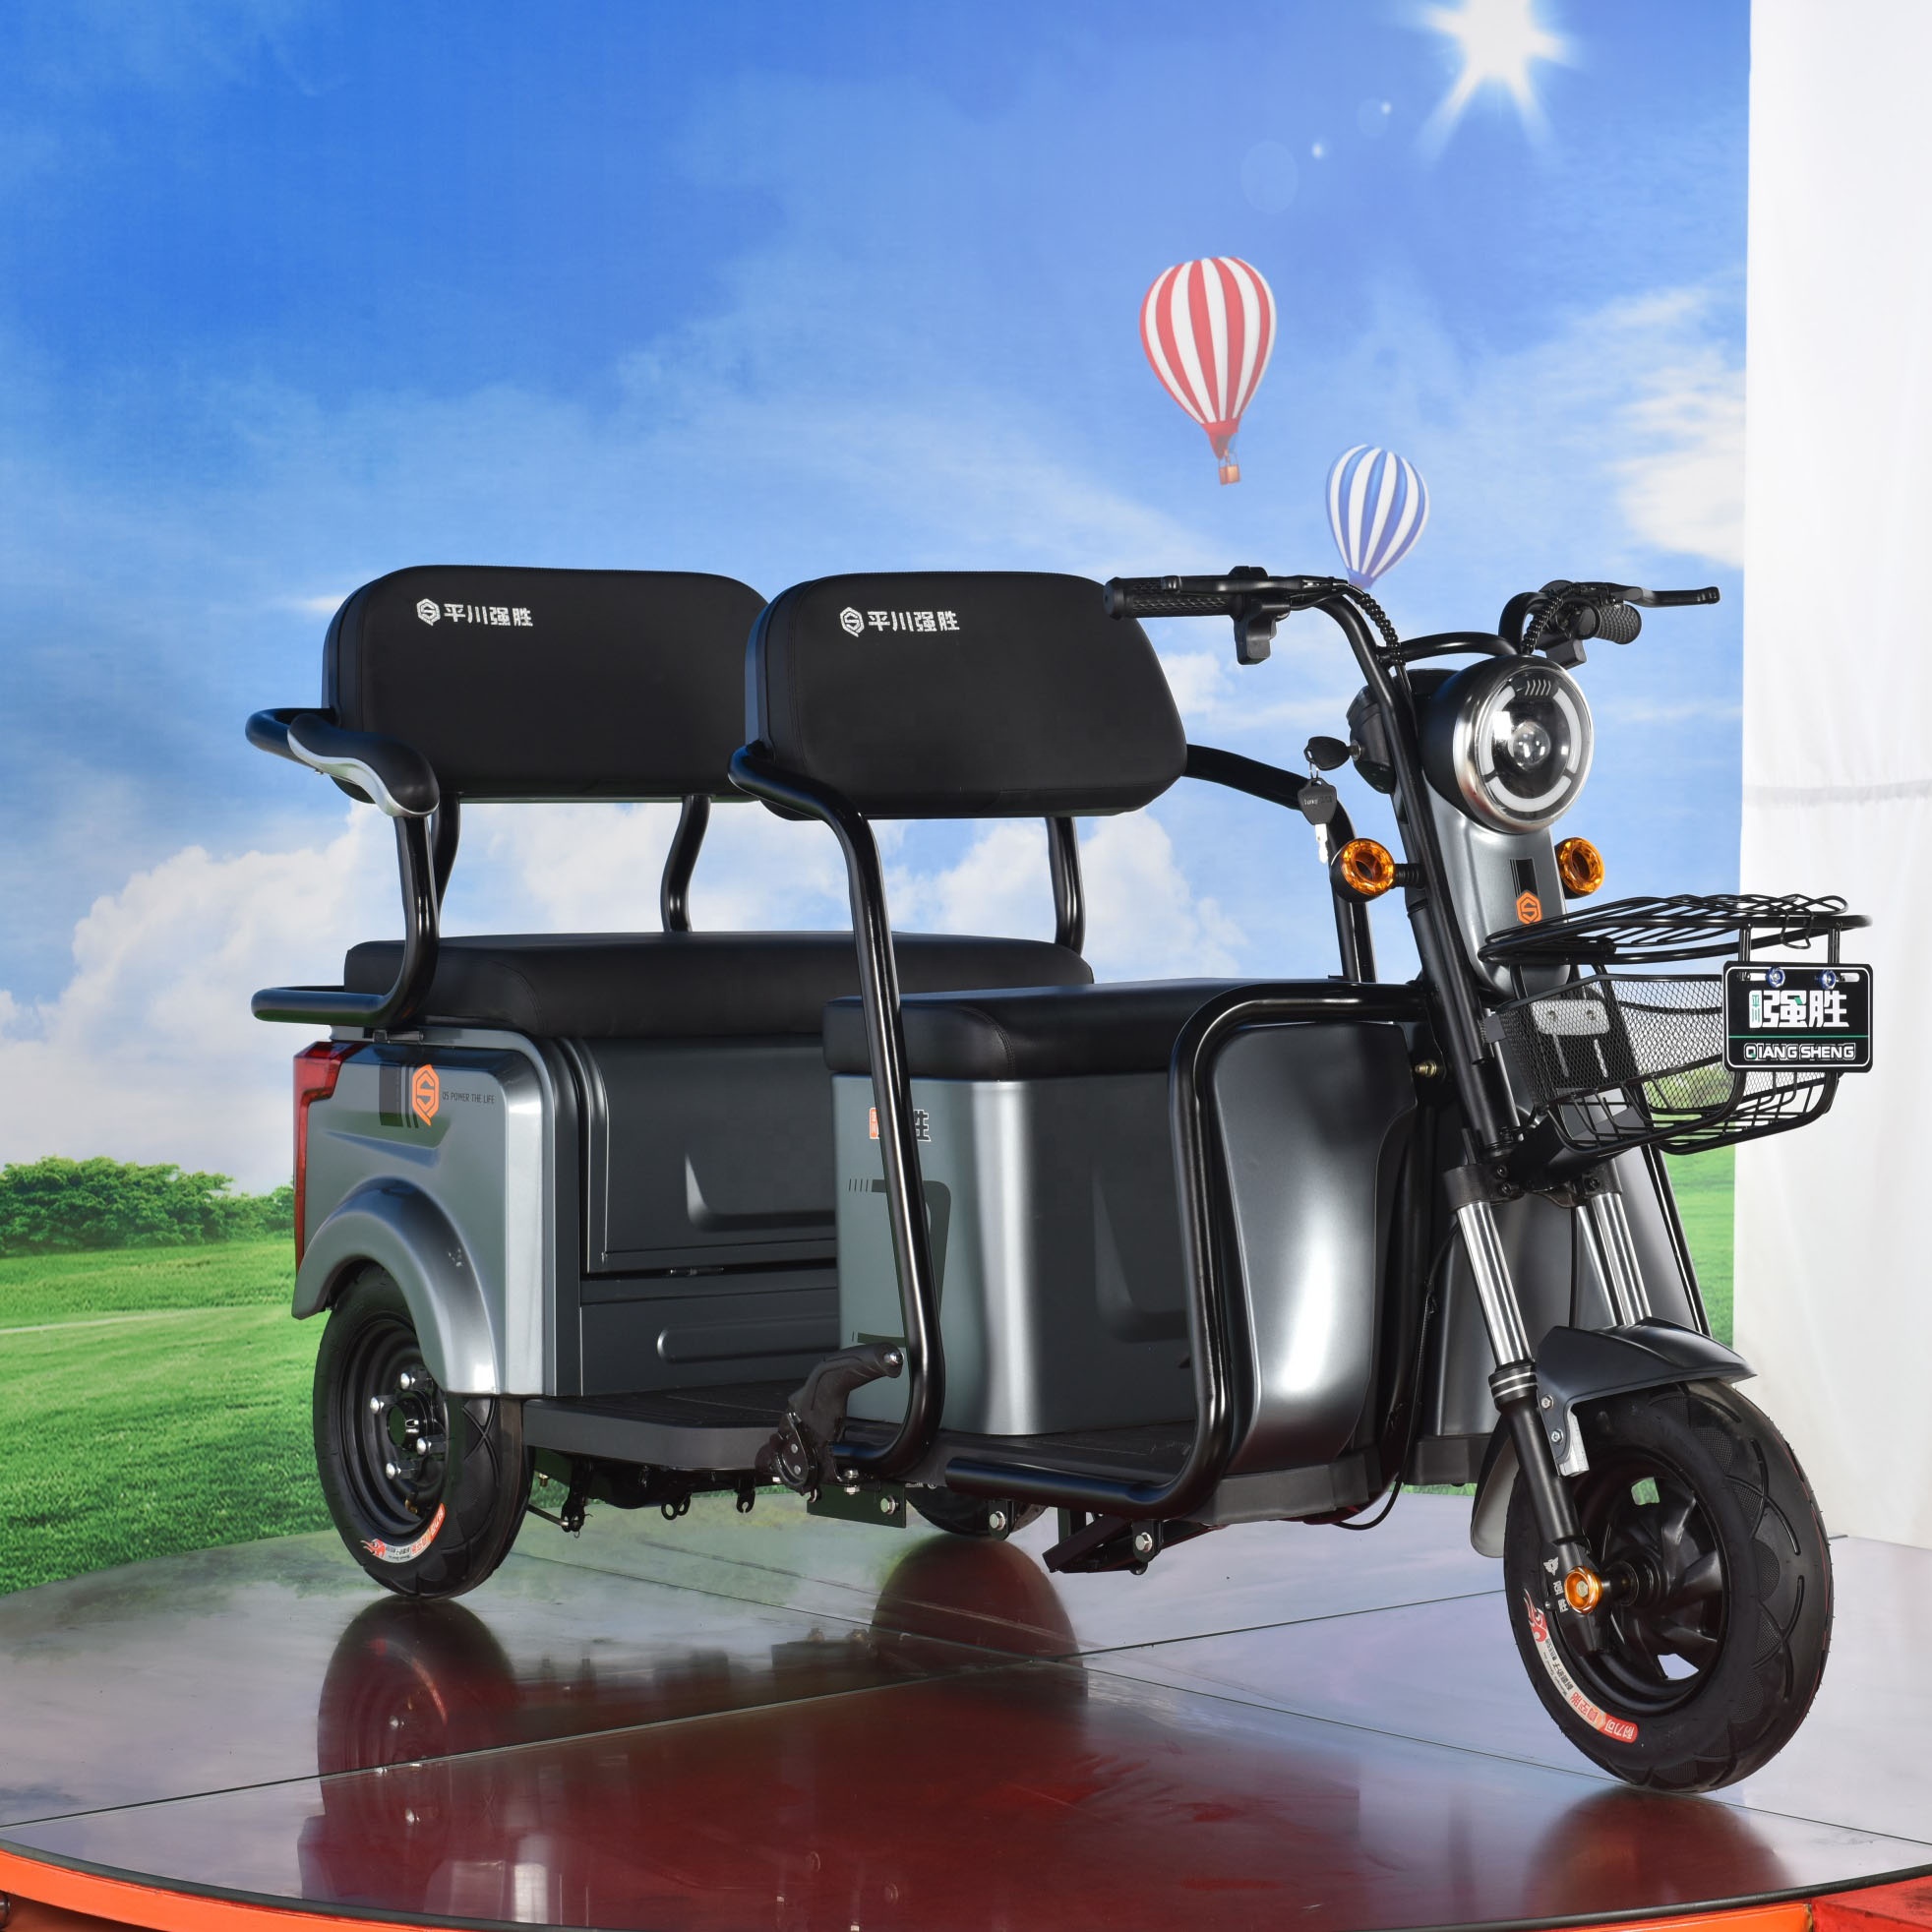 China Wholesale Electric Adult Tricycle Factories - Three wheel electric scooter mini metro e rickshaw small 3 wheel car – Qiangsheng